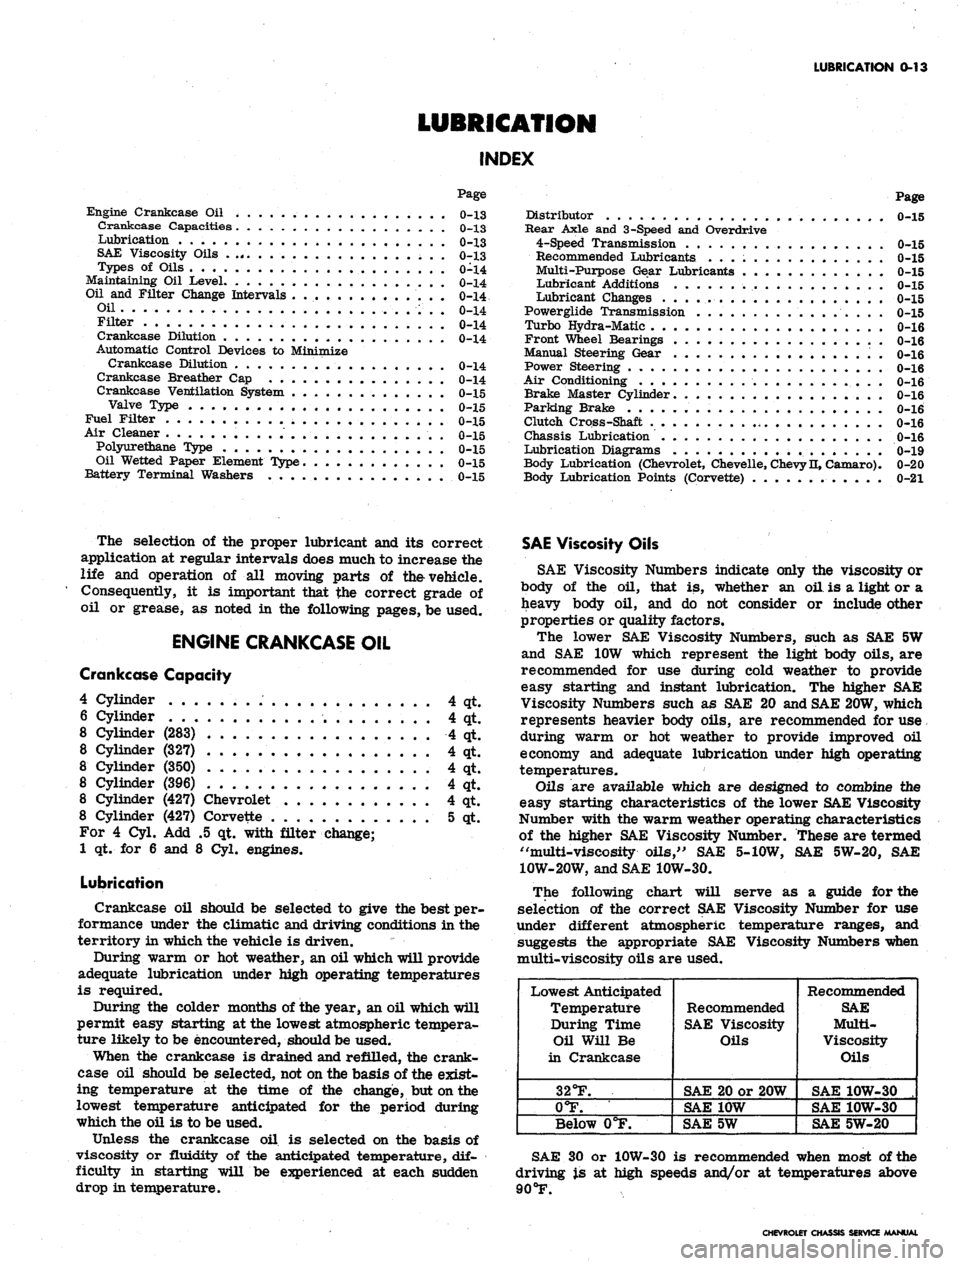 CHEVROLET CAMARO 1967 1.G Chassis Workshop Manual 
LUBRICATION 0-13

LUBRICATION

INDEX

Page

Engine Crankcase Oil . 0-13

Crankcase Capacities. . 0-13

Lubrication . ,
 •
 o-13

SAE Viscosity Oils 0-13

Types of Oils 0-14

Maintaining Oil Level 0